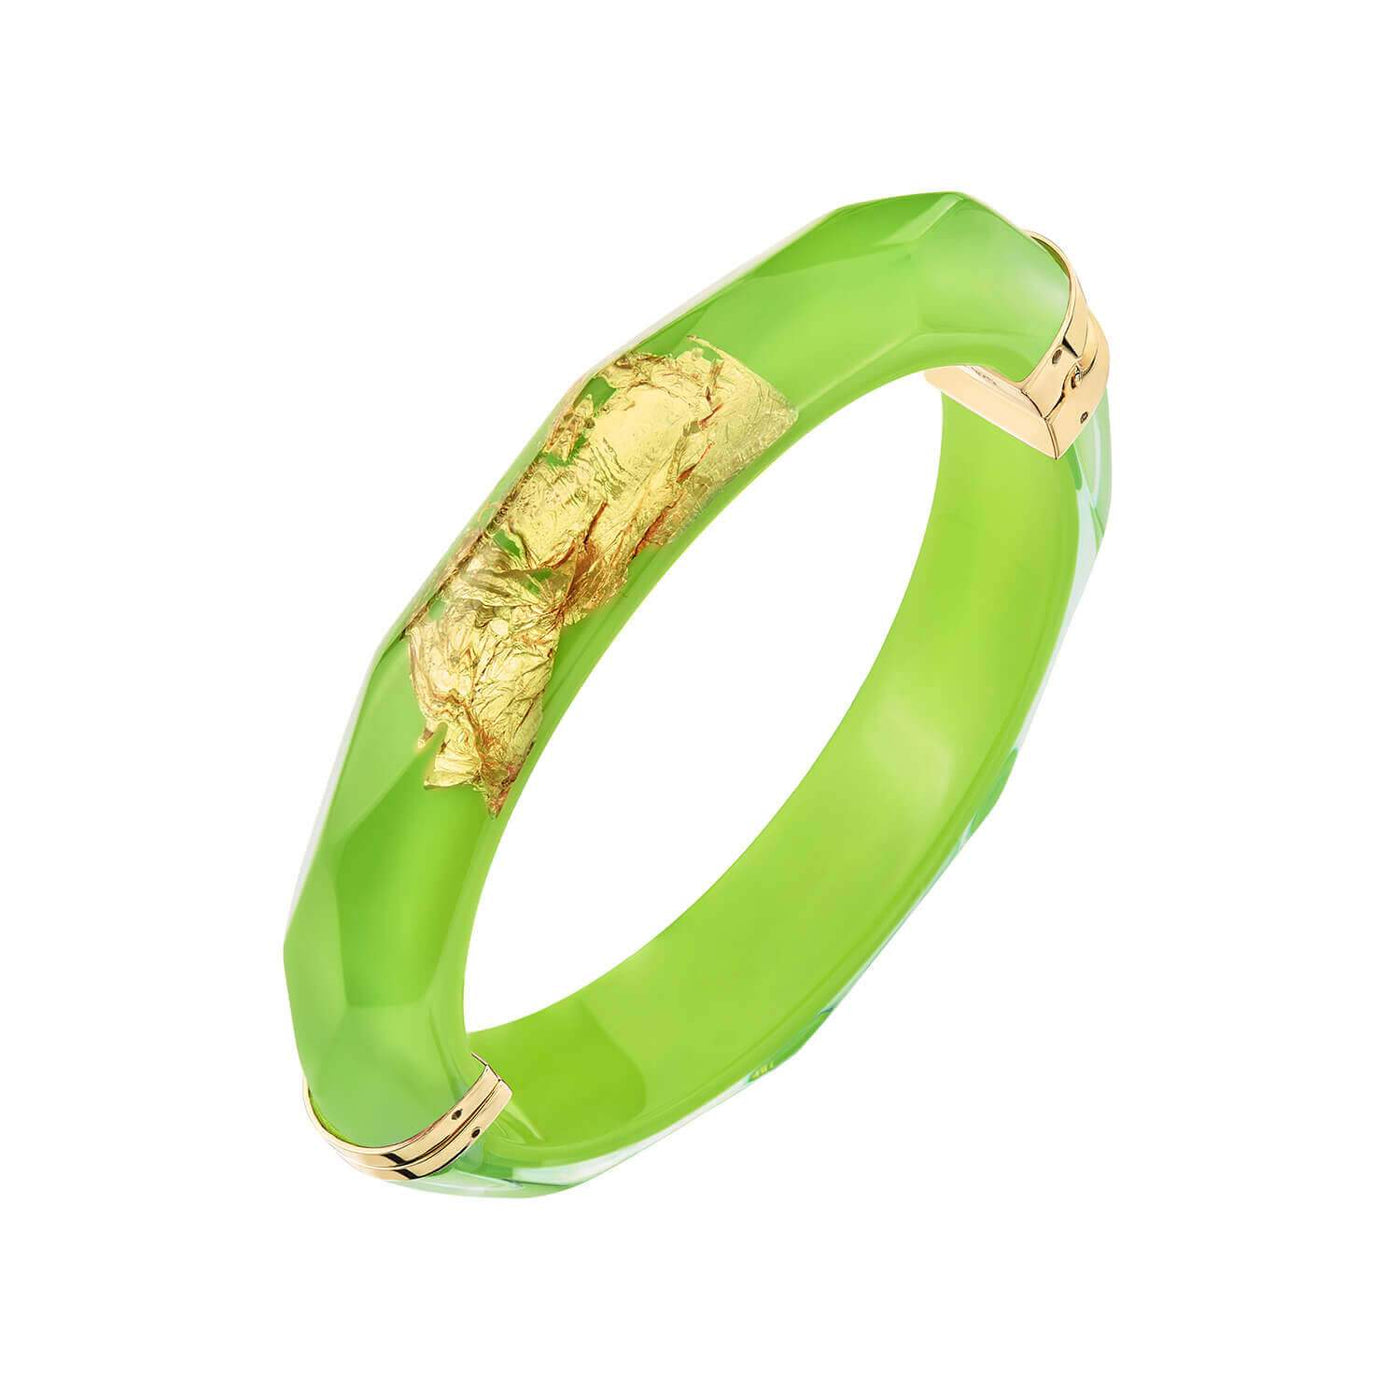 24K Gold Leaf Thin Faceted Lucite Bangle - NEON GREEN